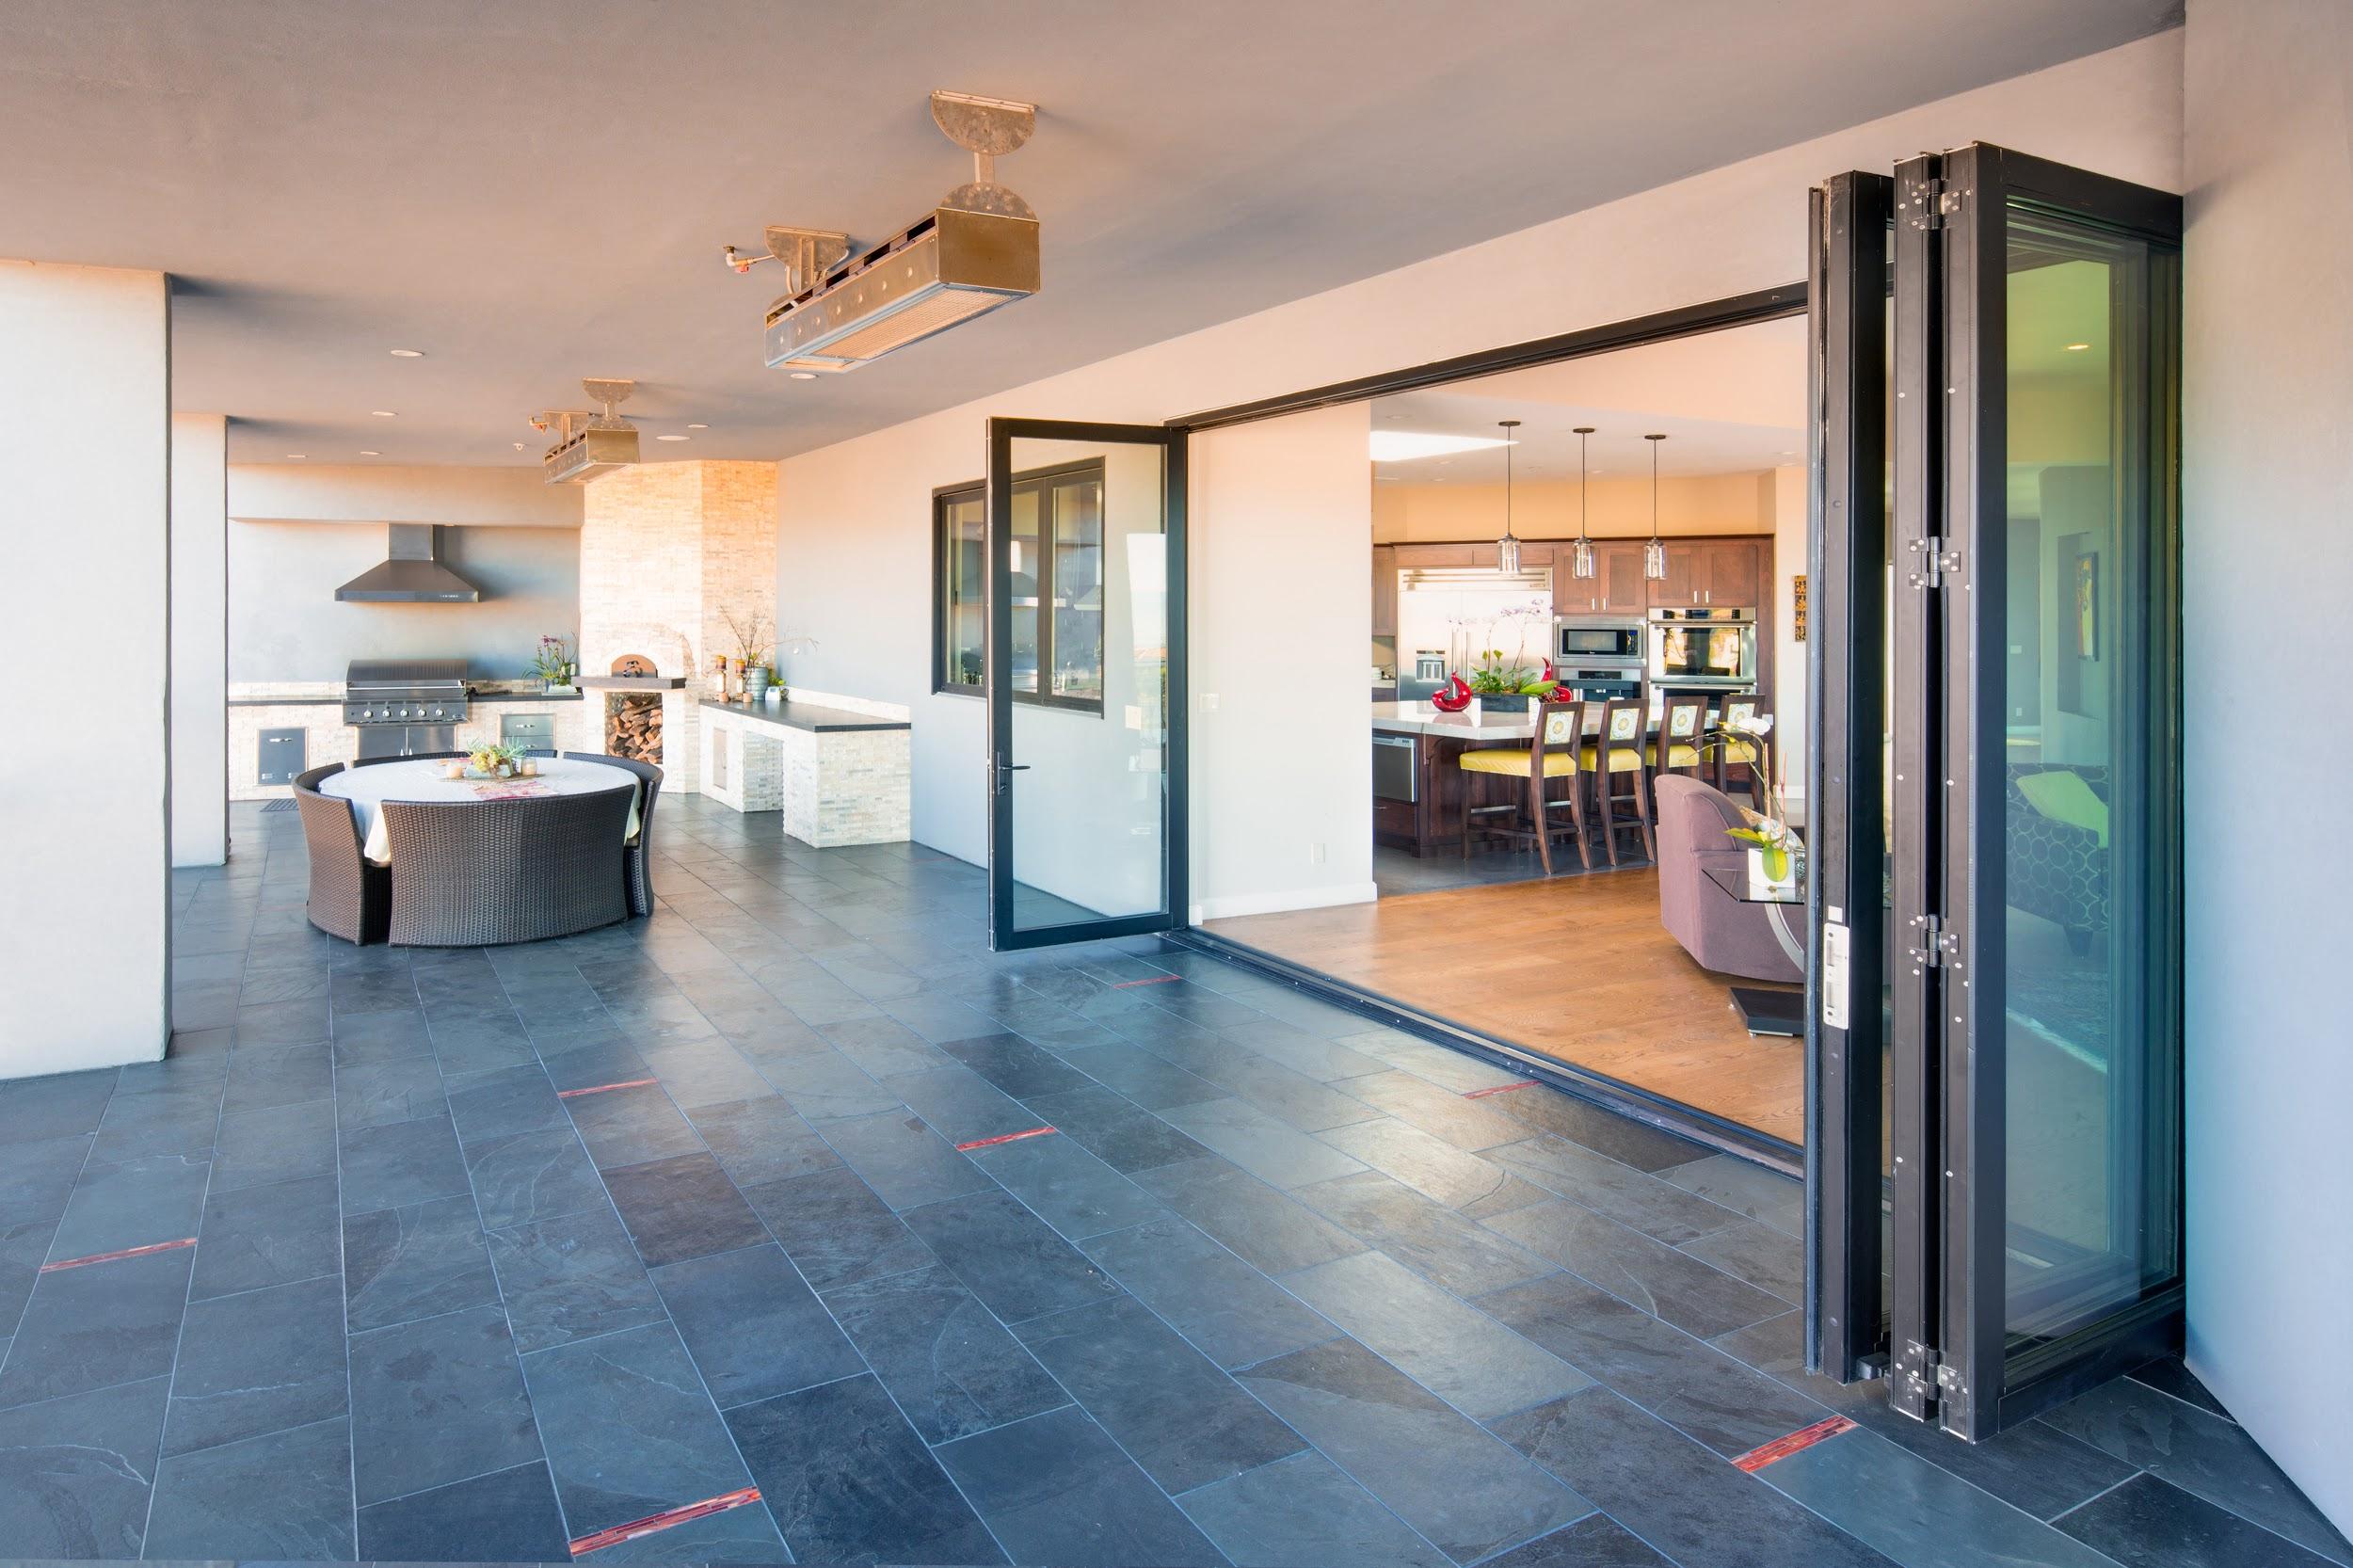 The Series 7950 Aluminum Bi-Fold Door from Western Window Systems opening onto a living space